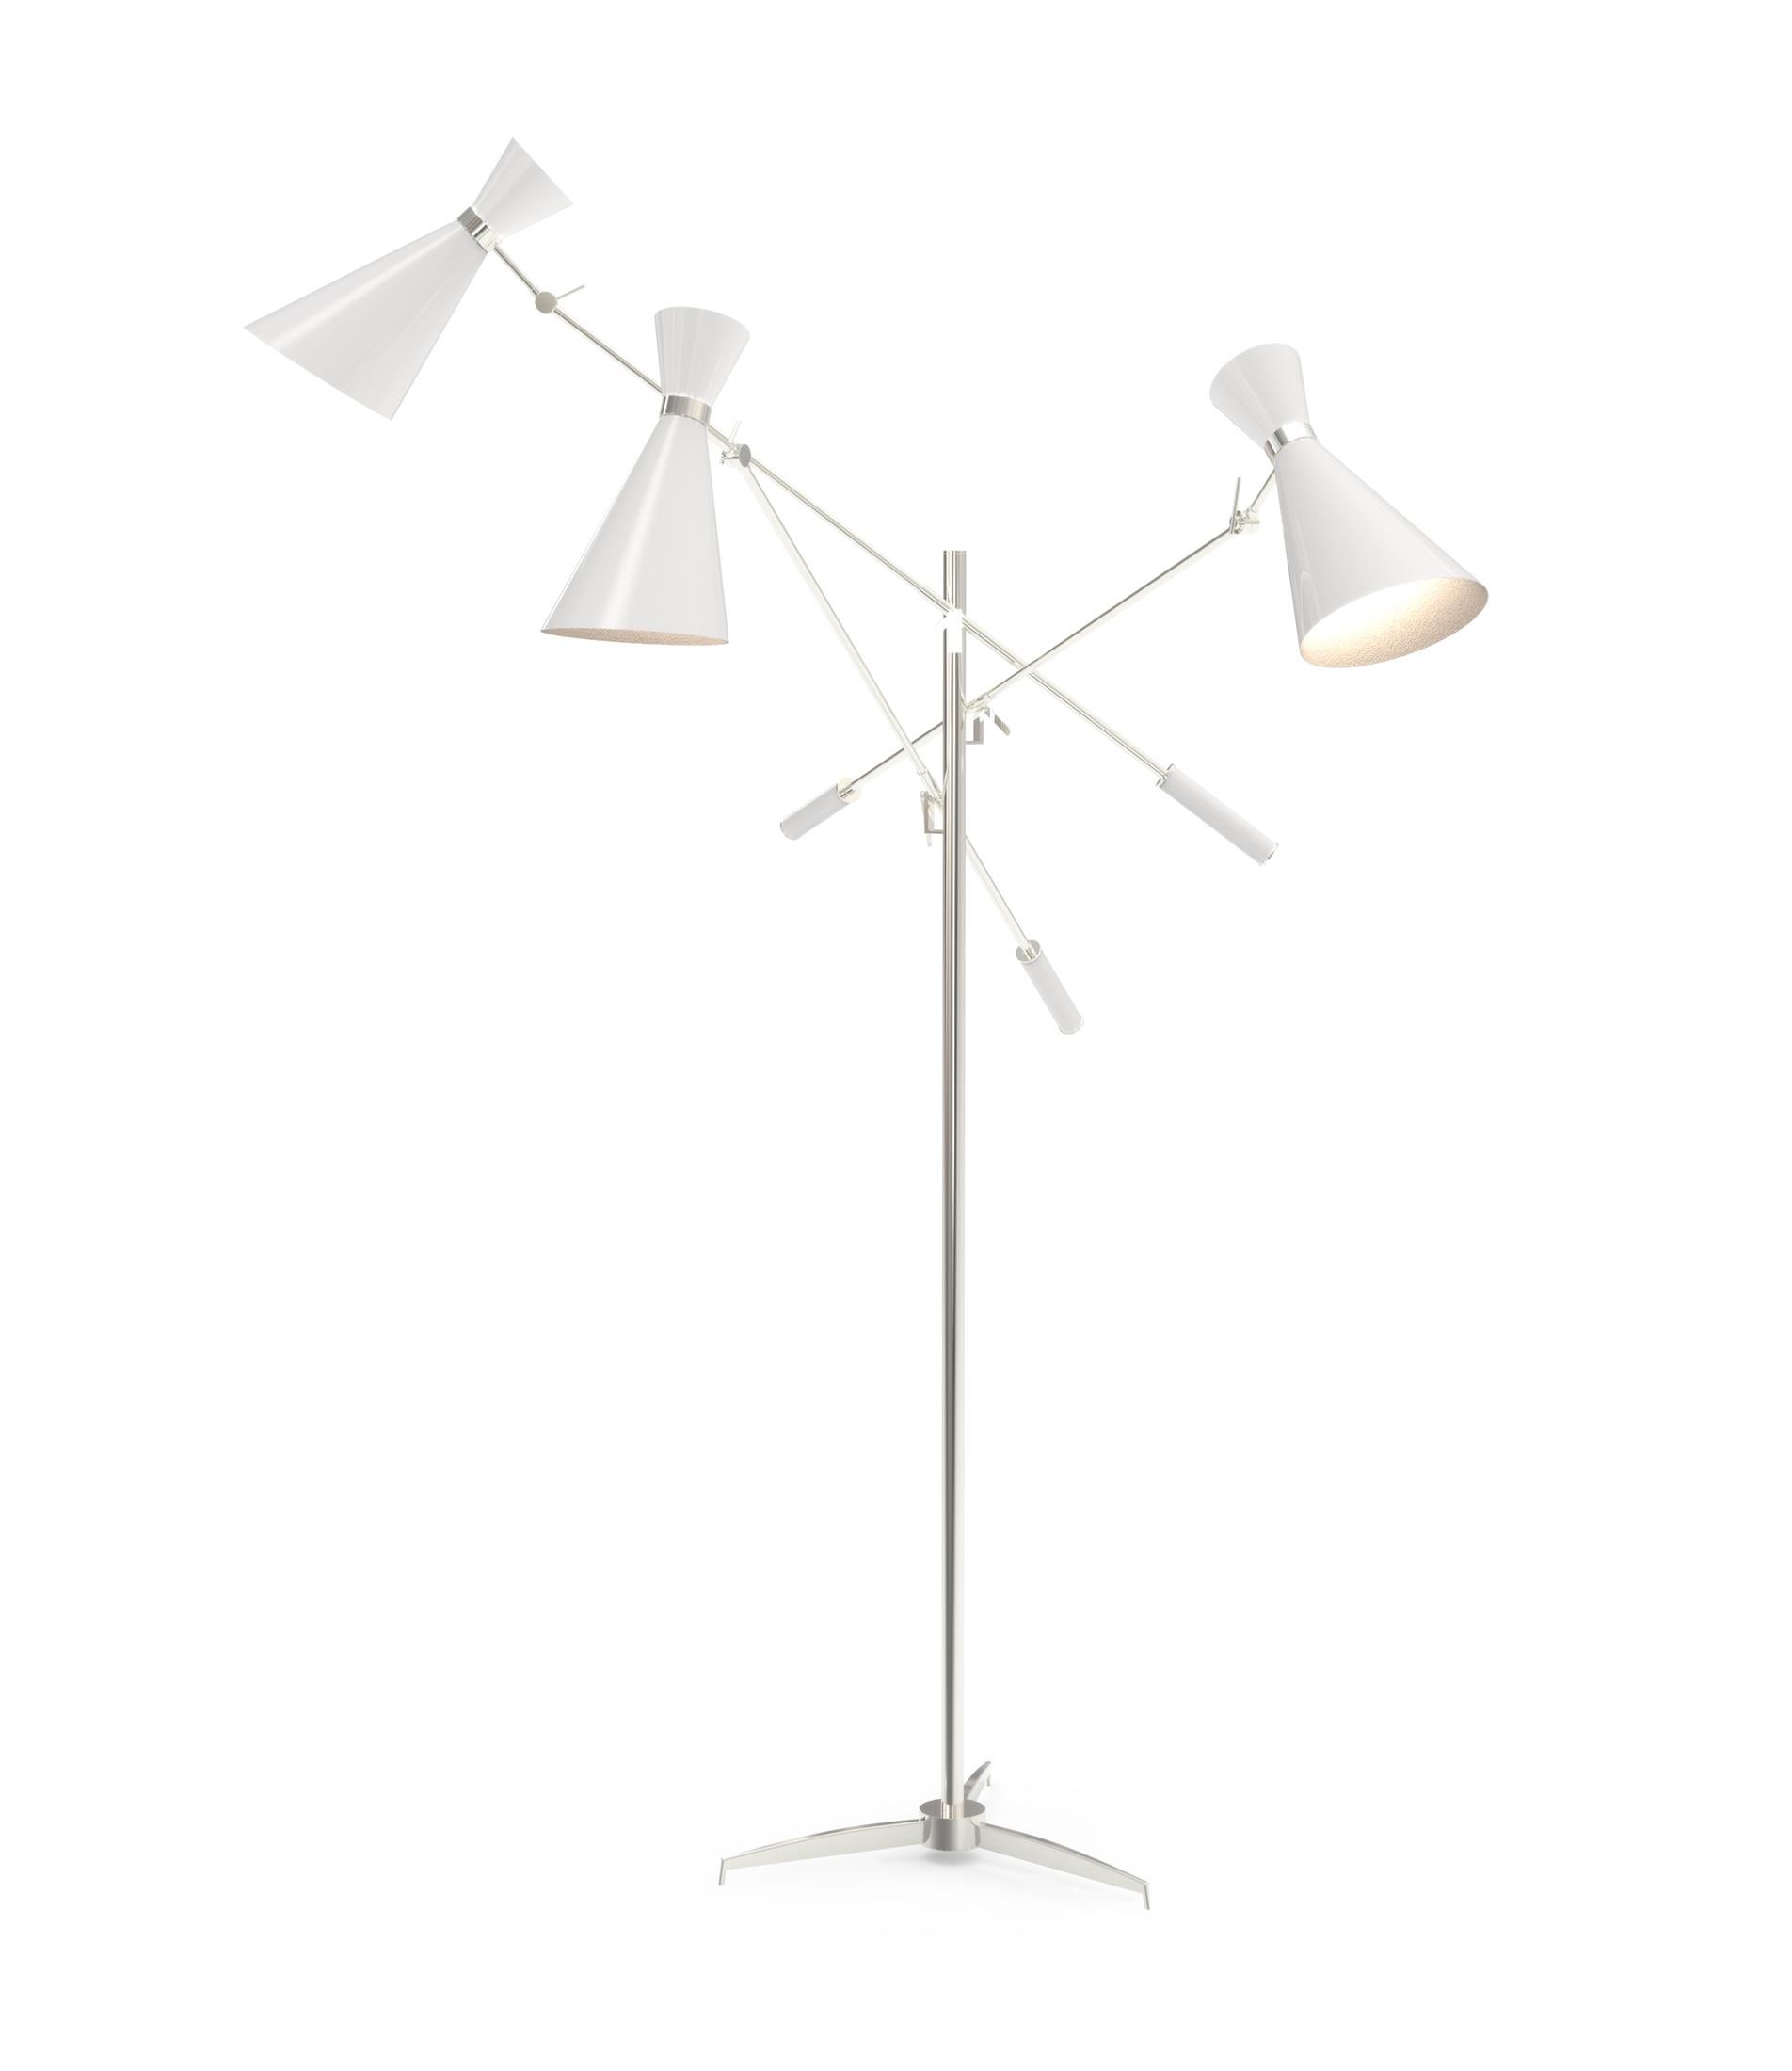 Stanley floor light is a style icon of the 1950s and 1960s. With the possibility of having 1 to 3 moveable arms, this vintage style floor lamp will add effortless style to your Mid-Century Modern reading nook. The 3-light floor lamp holds three Boom